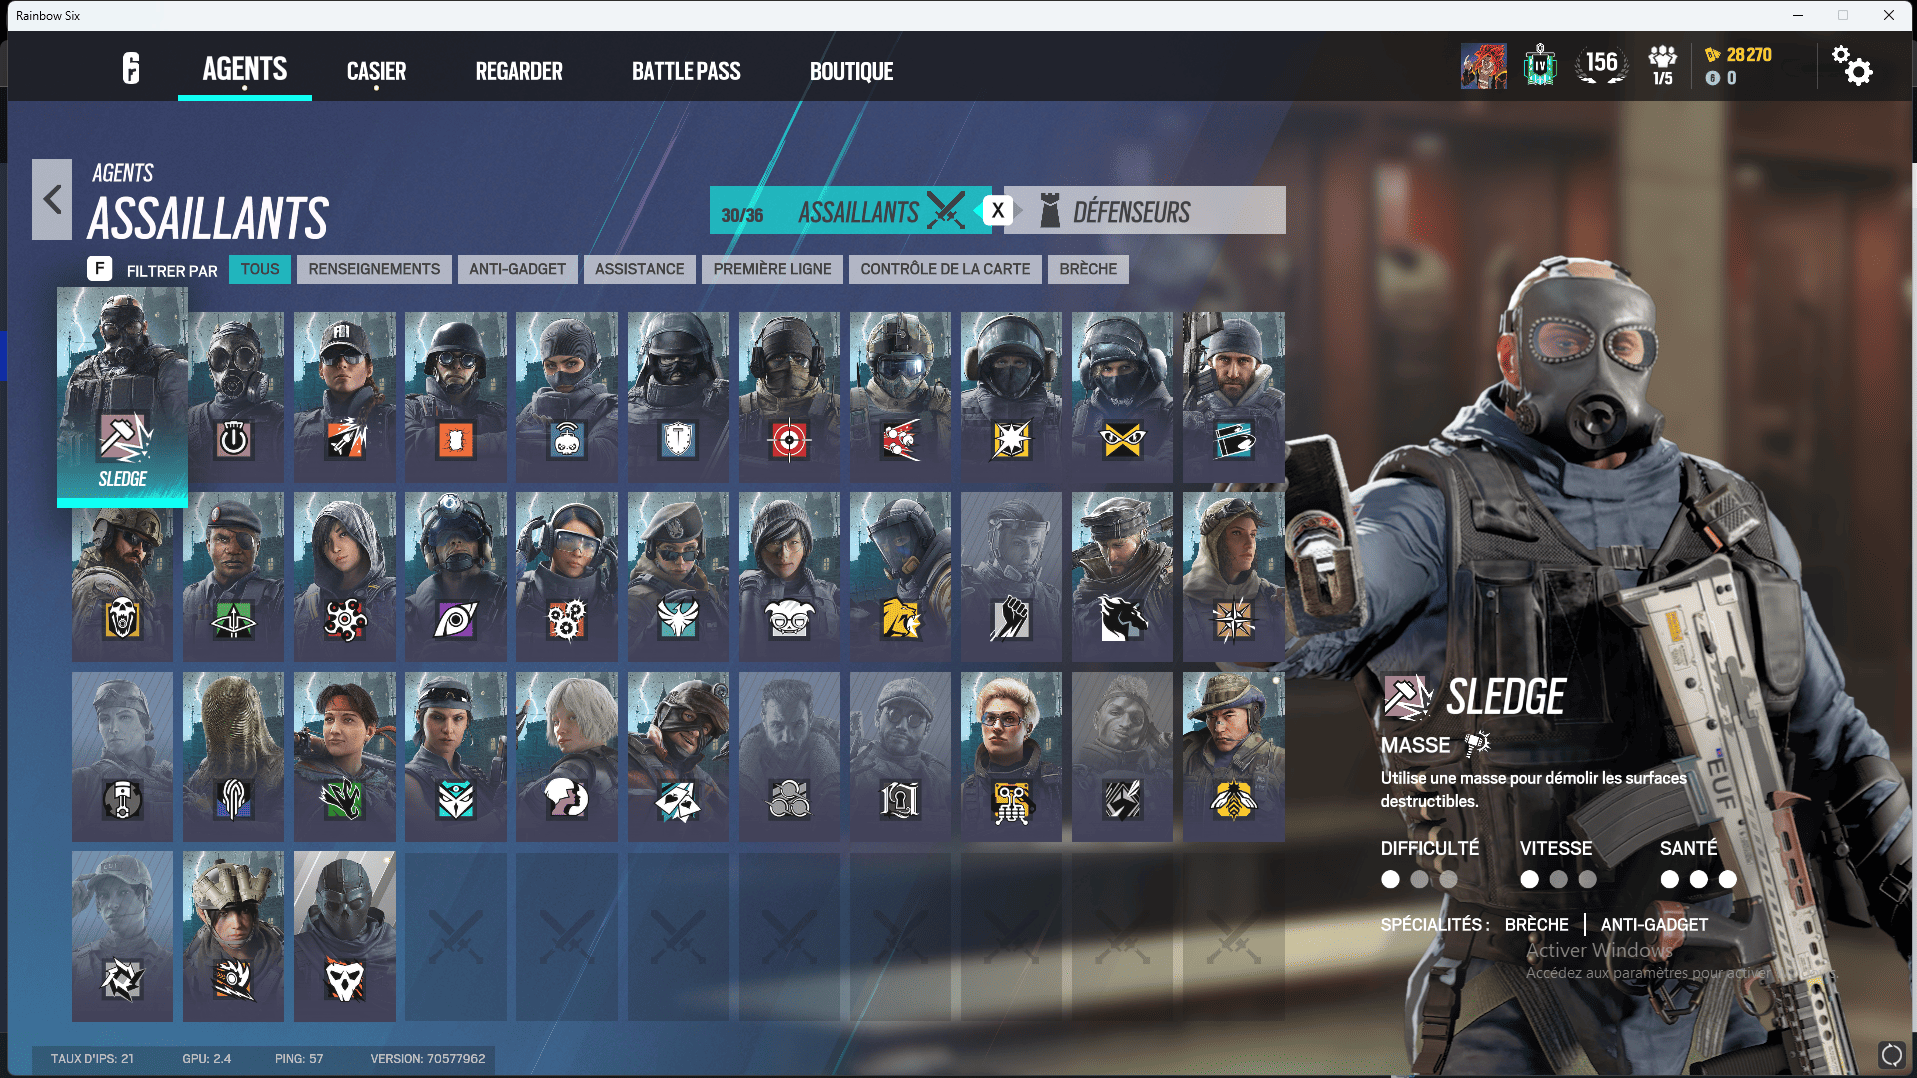 [Uplay] Level 156 -1x Diamond 4-KD 1.25 -6 Black Ice x1 -63 ops -28000 Renown - -358 Items (FULL ACCESS) (RANKED)